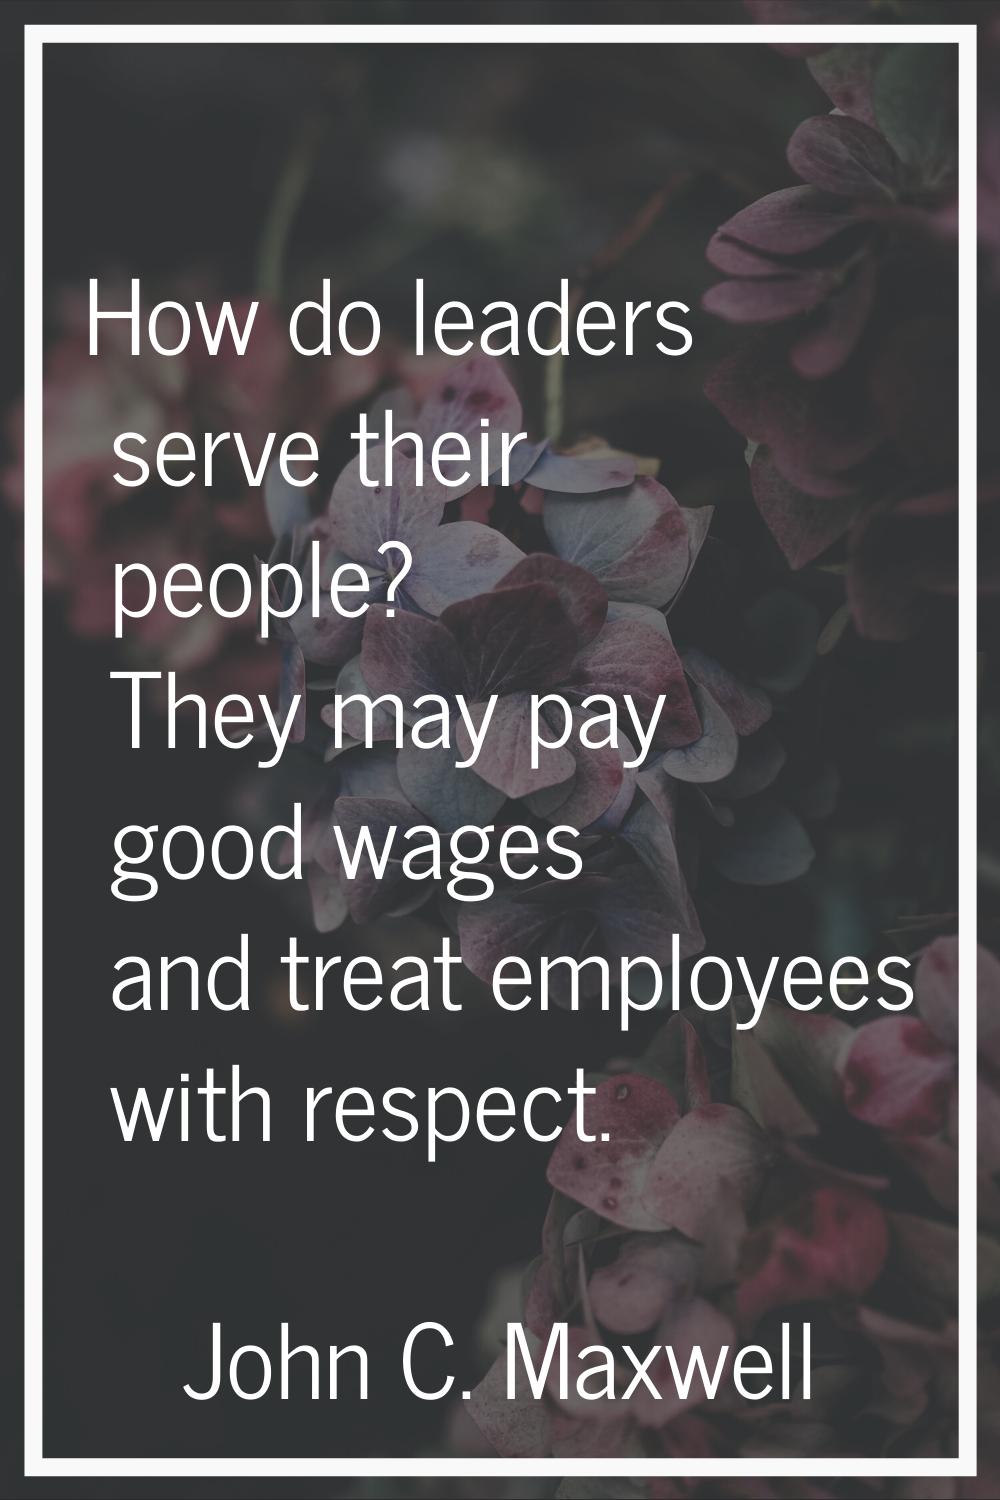 How do leaders serve their people? They may pay good wages and treat employees with respect.